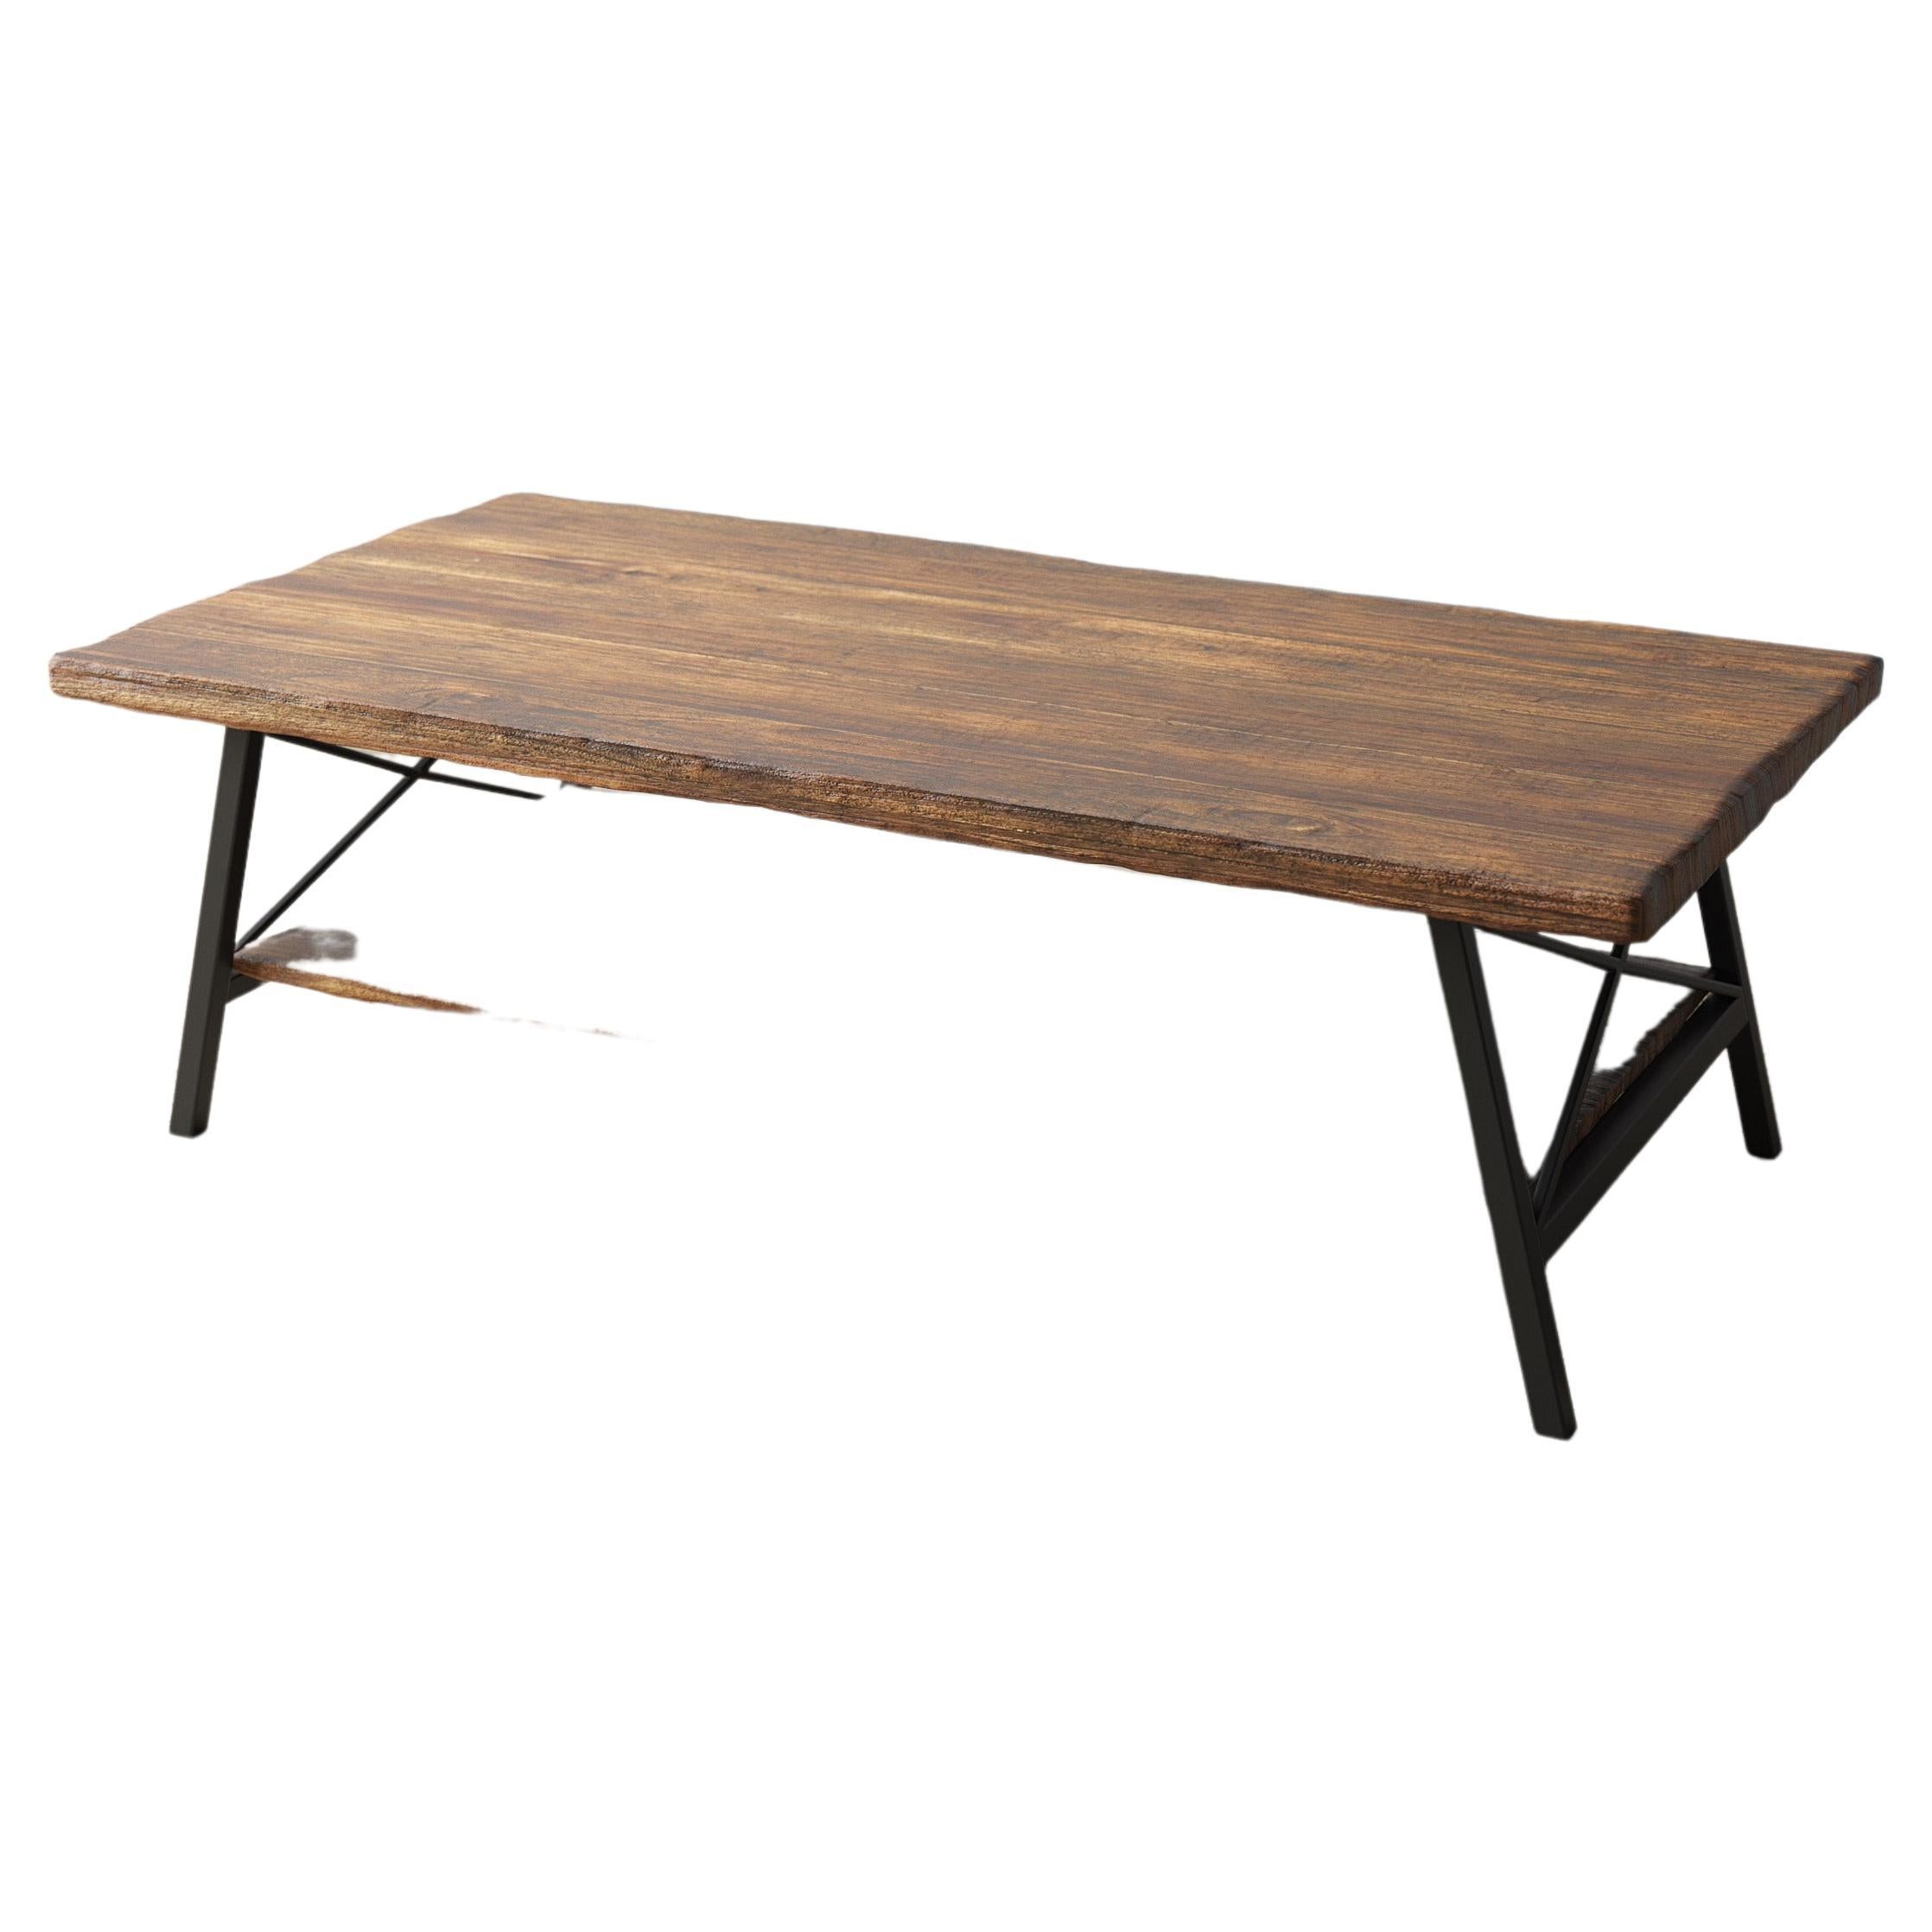 Solid Teak Coffee Table with Lower Shelf and Metal Legs